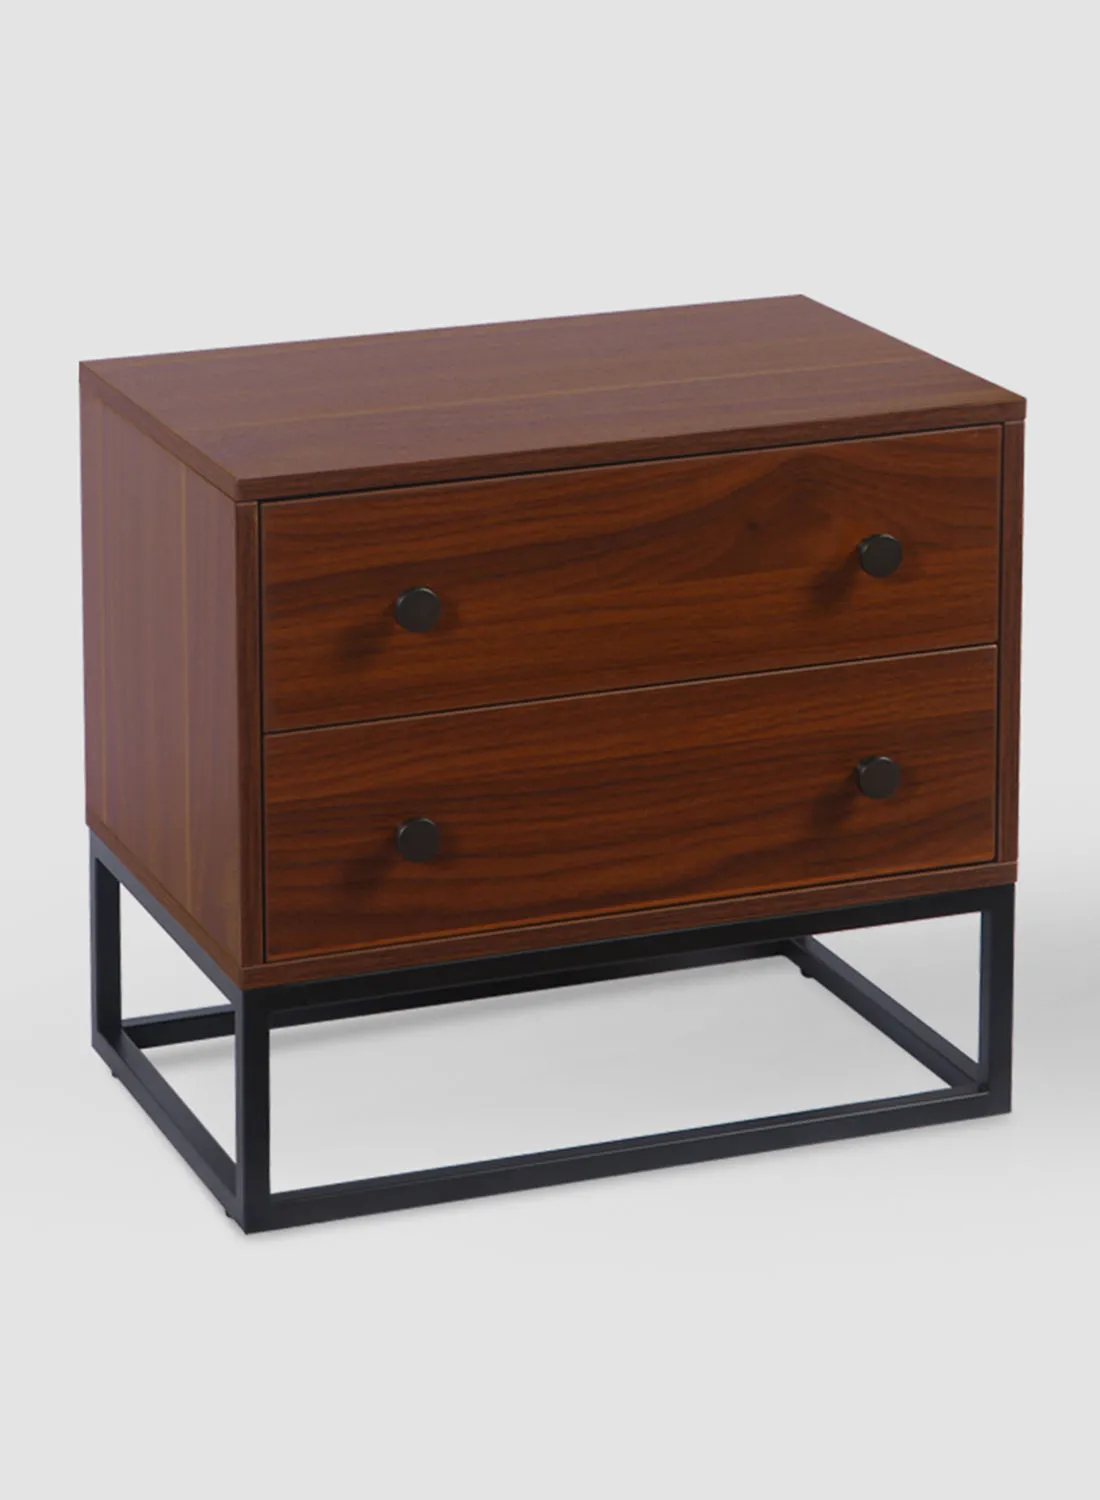 Switch Bedside Table - Size 600 X 390 X 550 Brown Nightstand Comdina - Bedroom Furniture